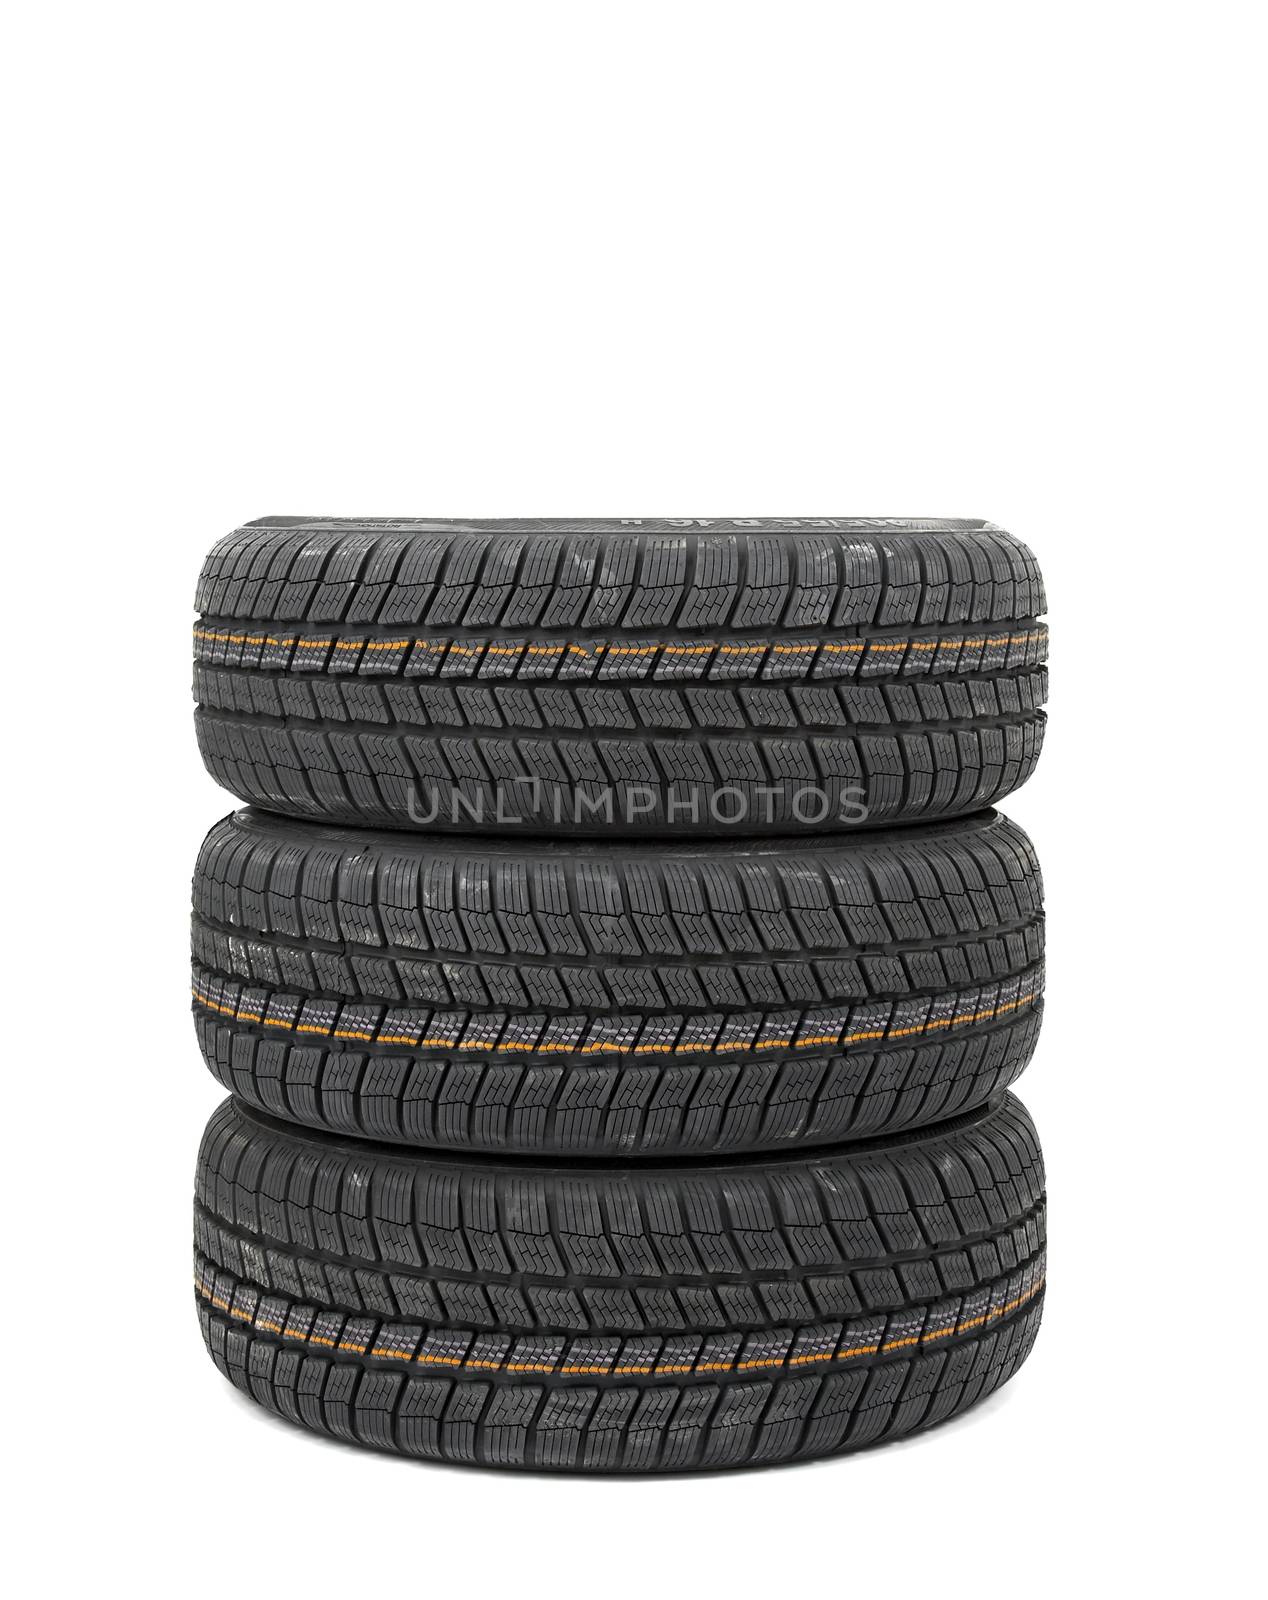 New winter tyres in a pile